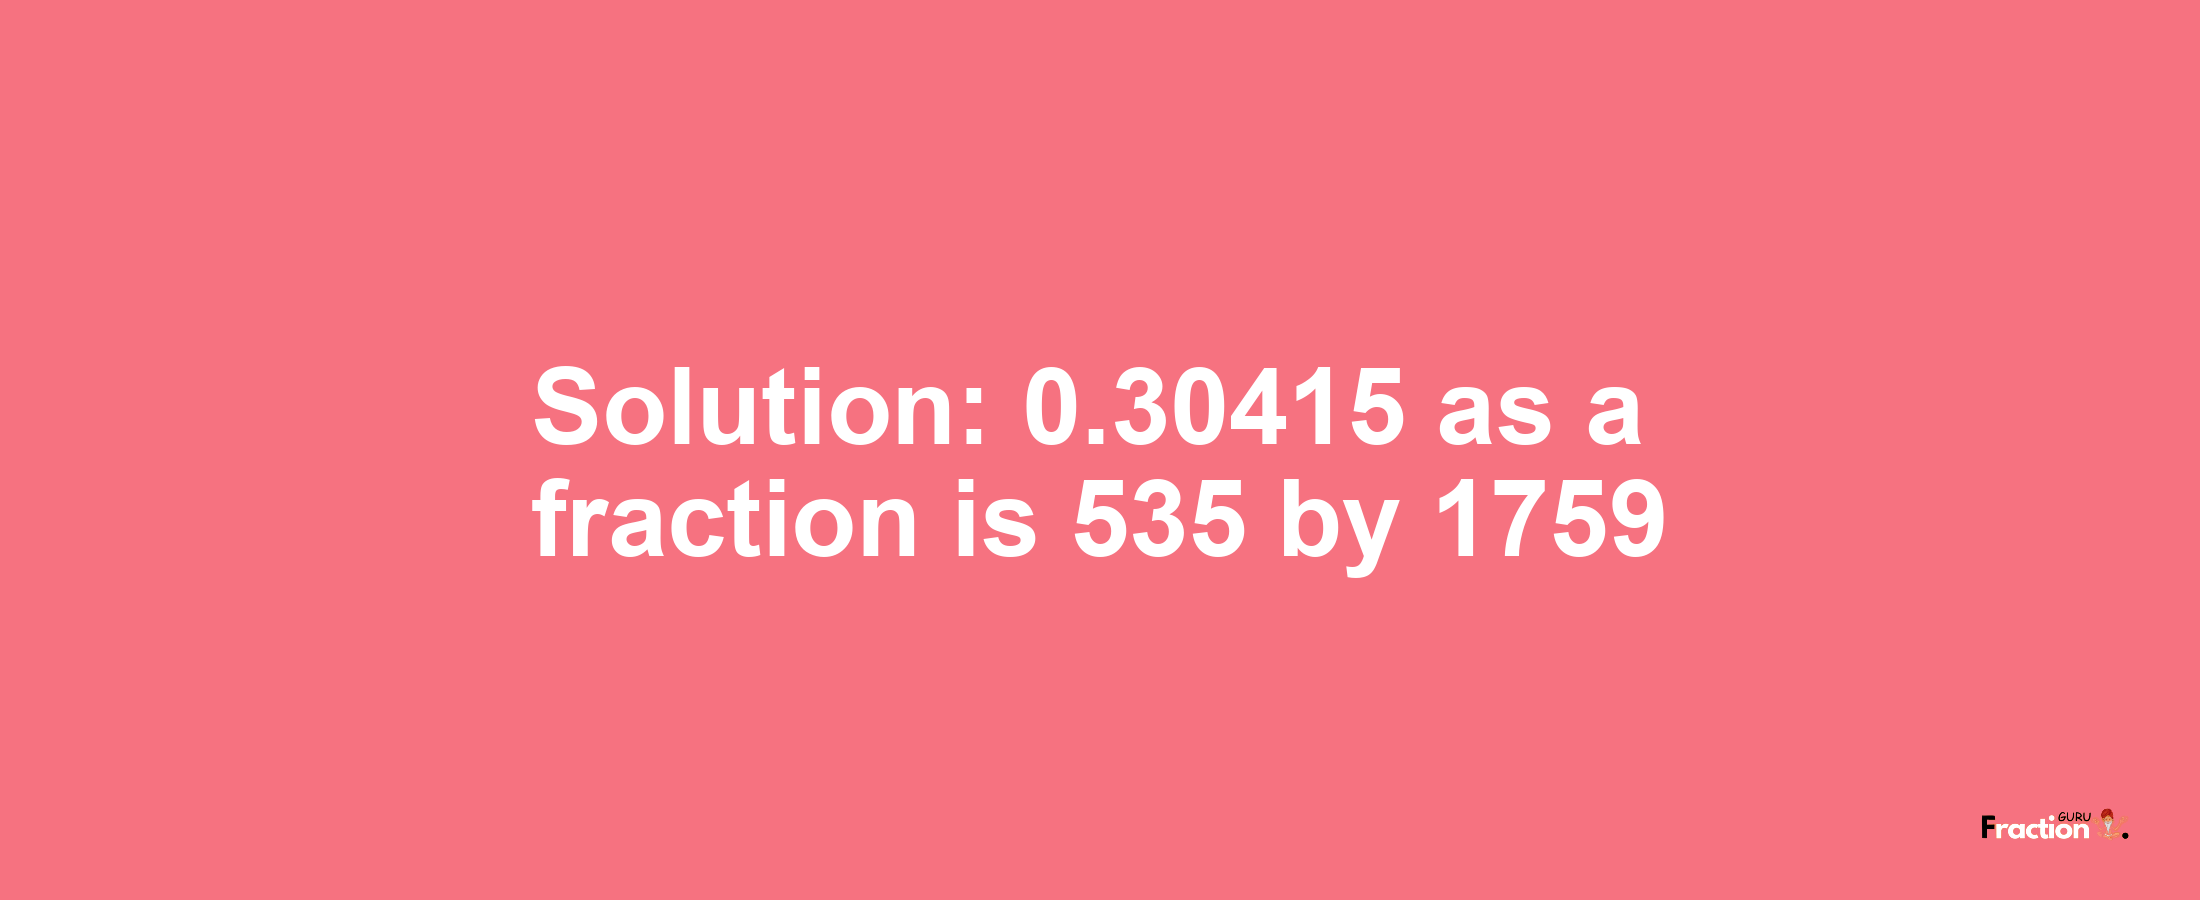 Solution:0.30415 as a fraction is 535/1759